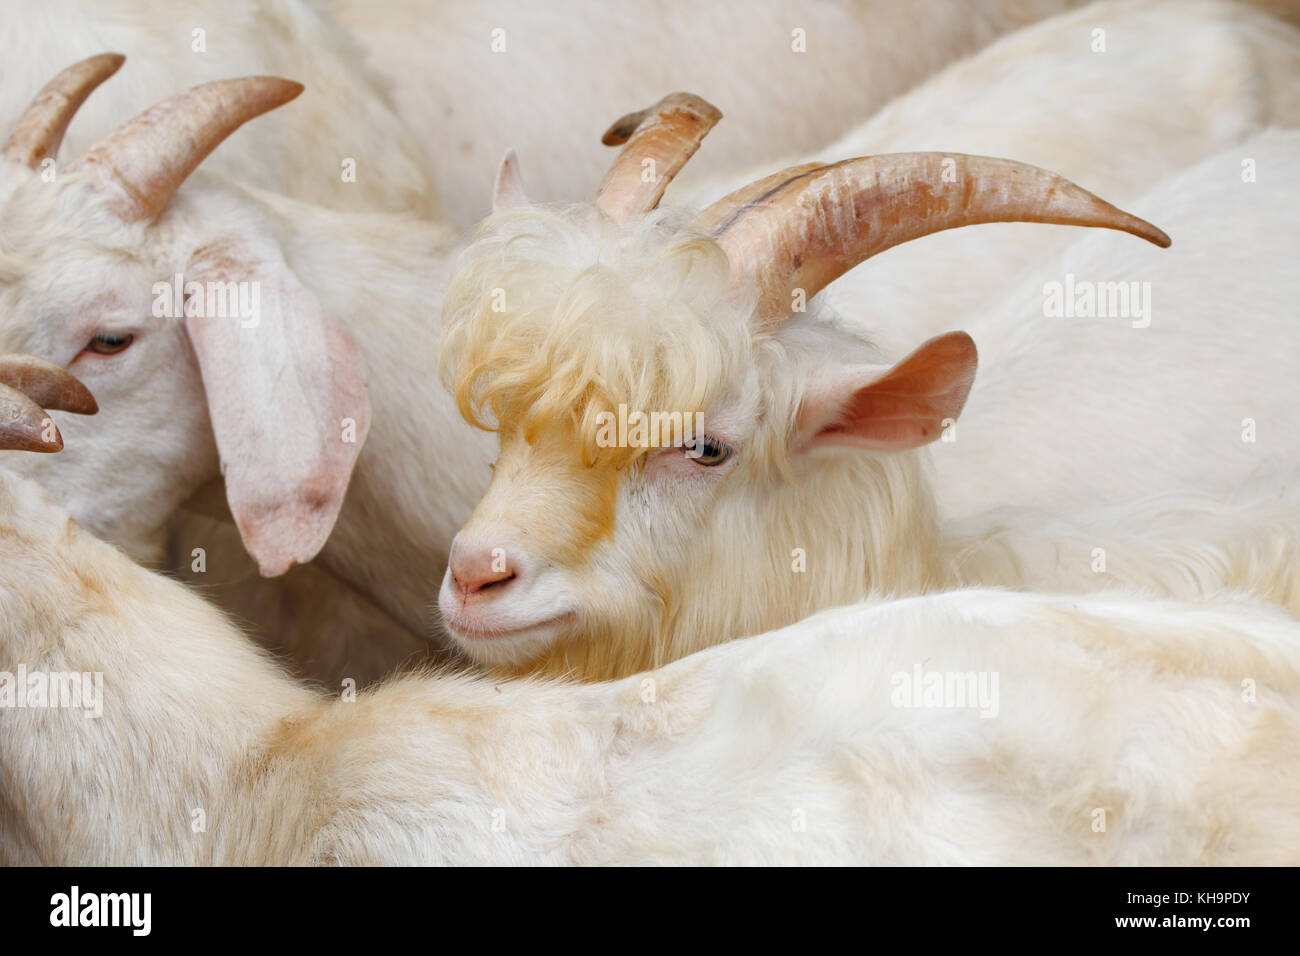 Saanen goat : A famous domestic goat breed for milk producer from Switzerland Stock Photo